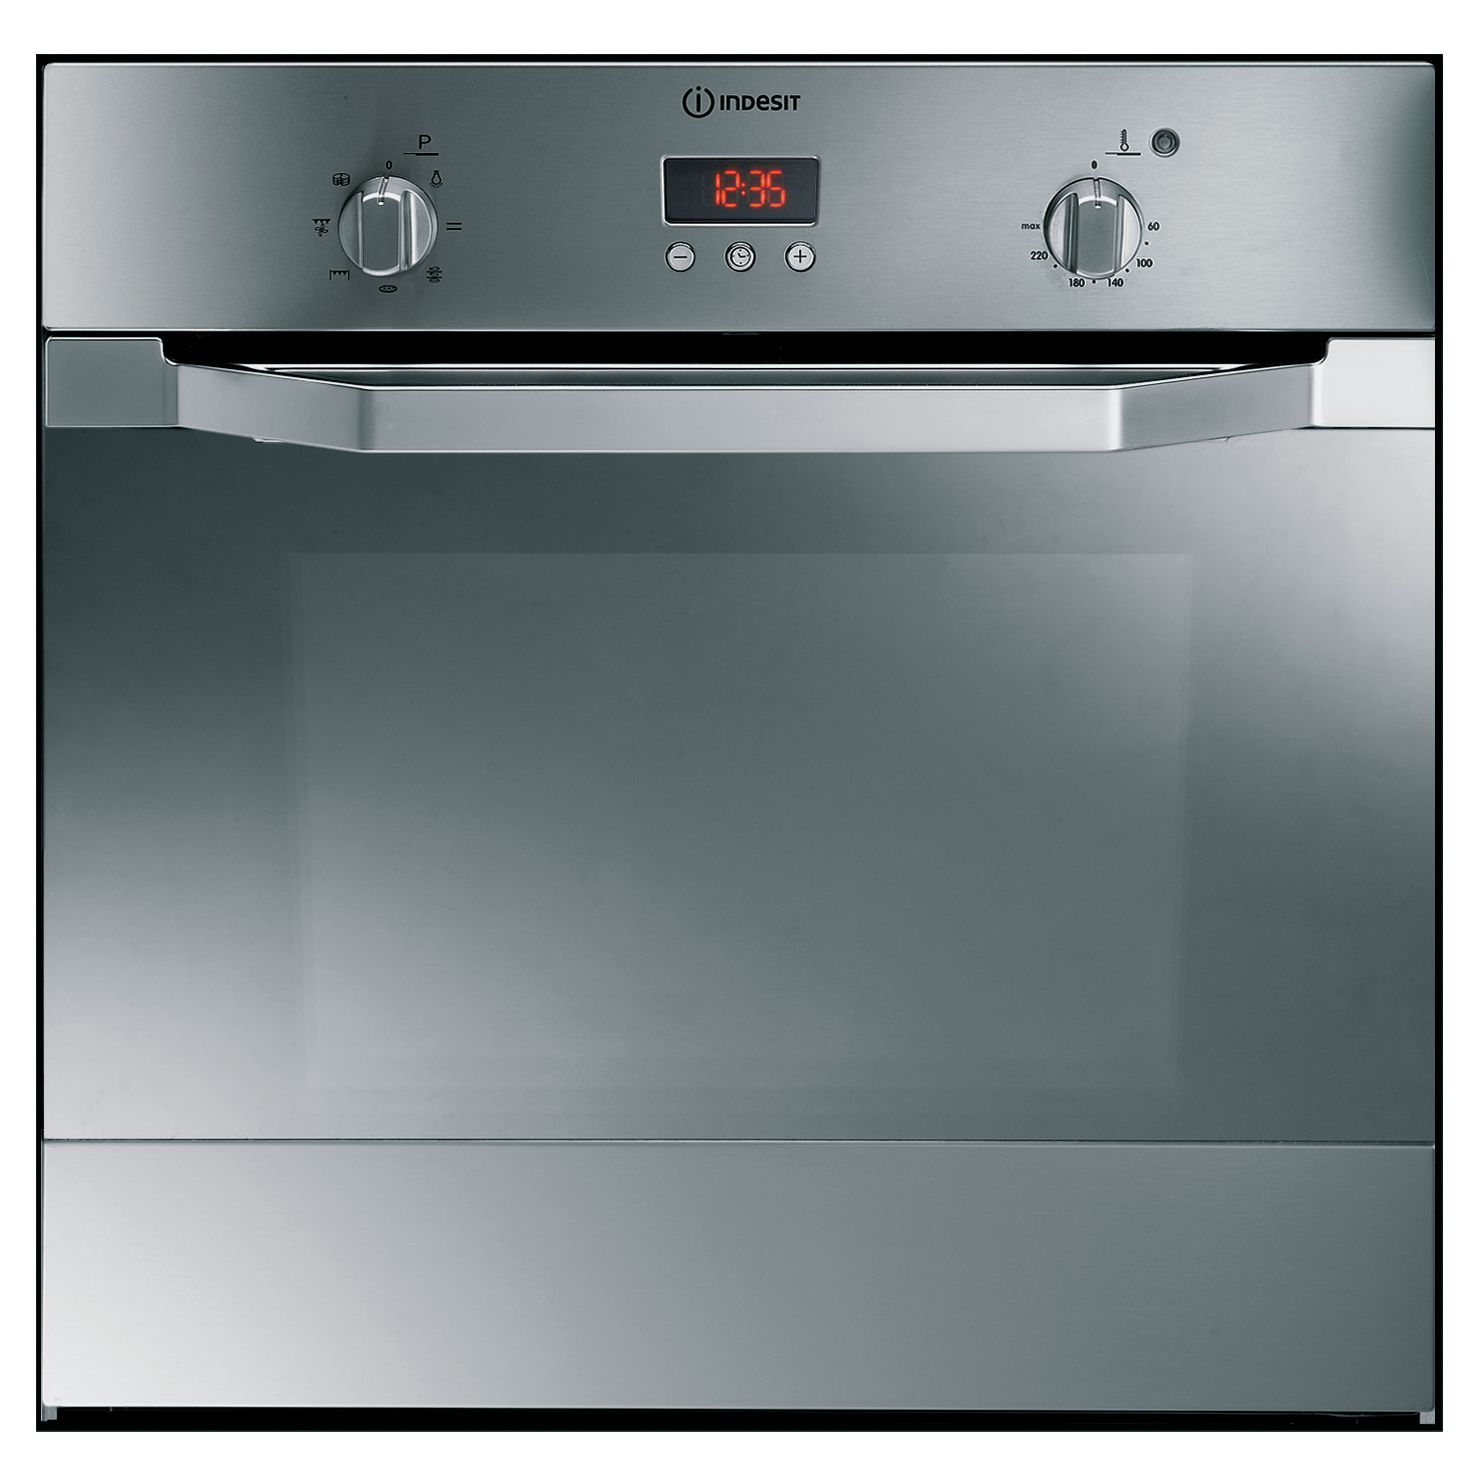 Indesit IF63KAIX Single Electric Oven, Stainless Steel at JohnLewis